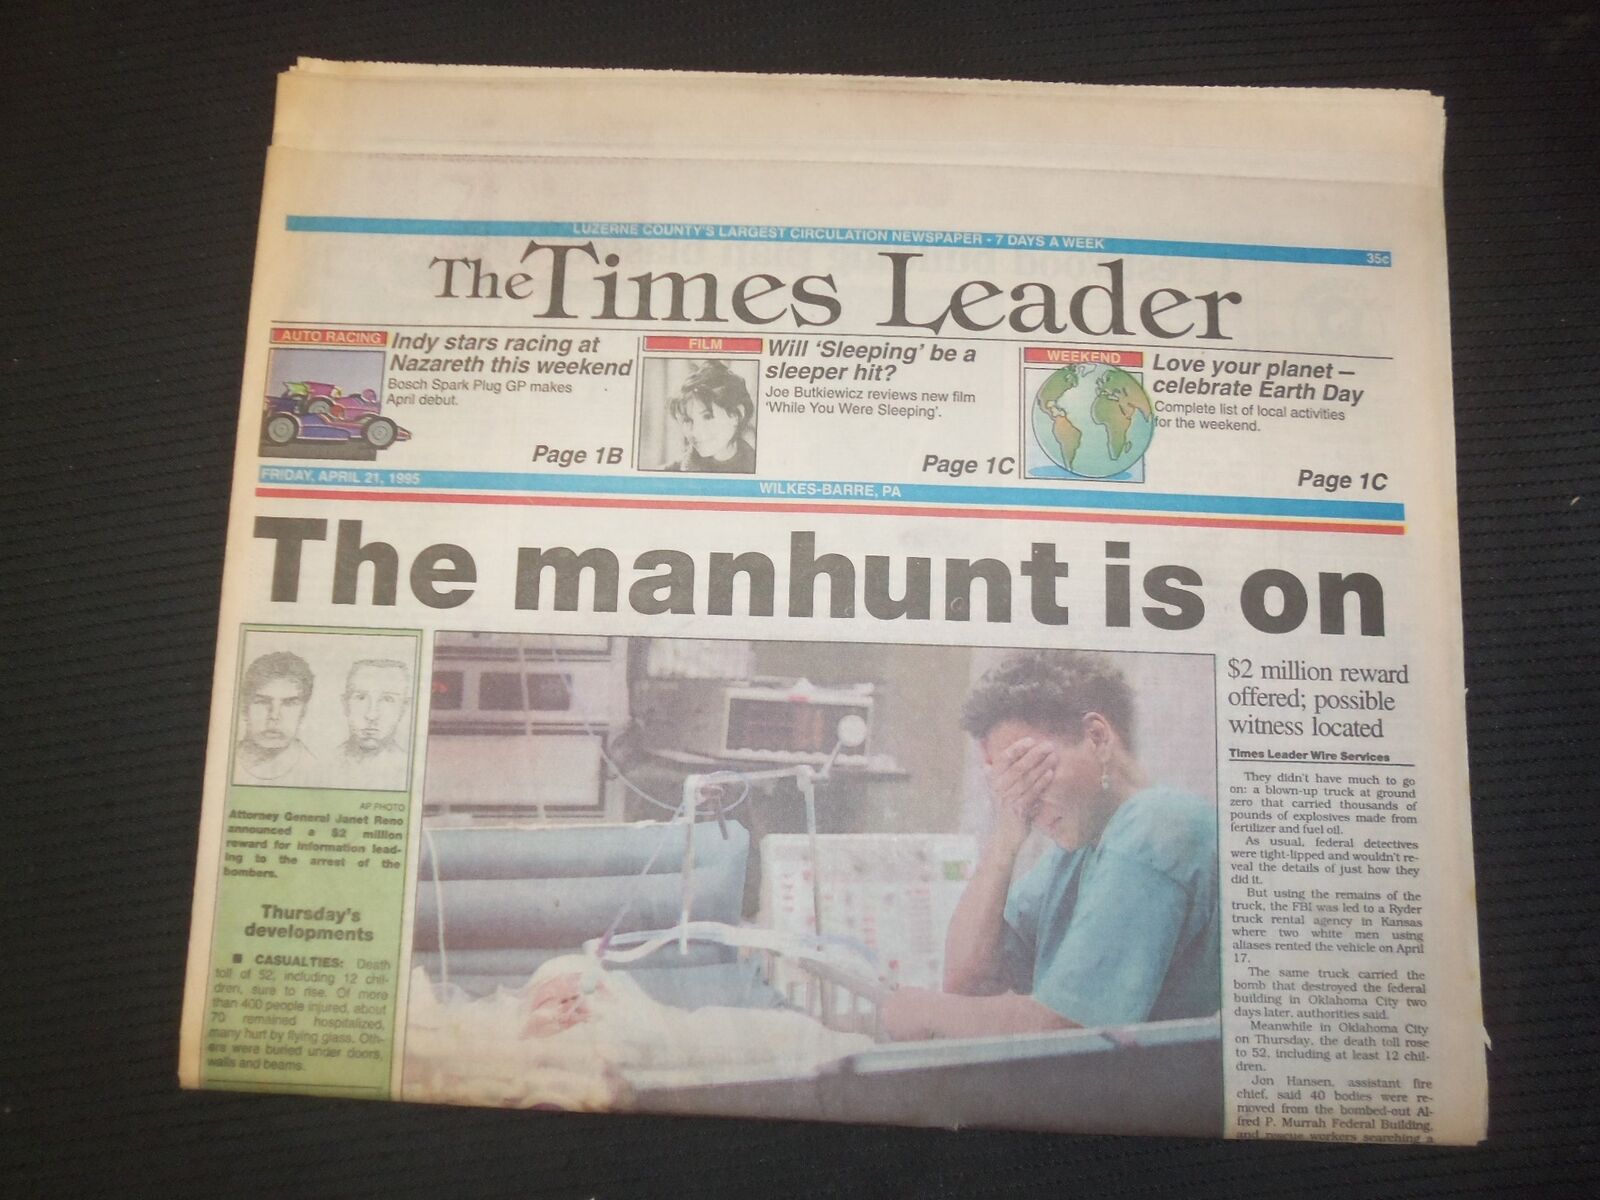 1995 APR 21 WILKES-BARRE TIMES LEADER - OKLAHOMA CITY MANHUNT IS ON - NP 7580